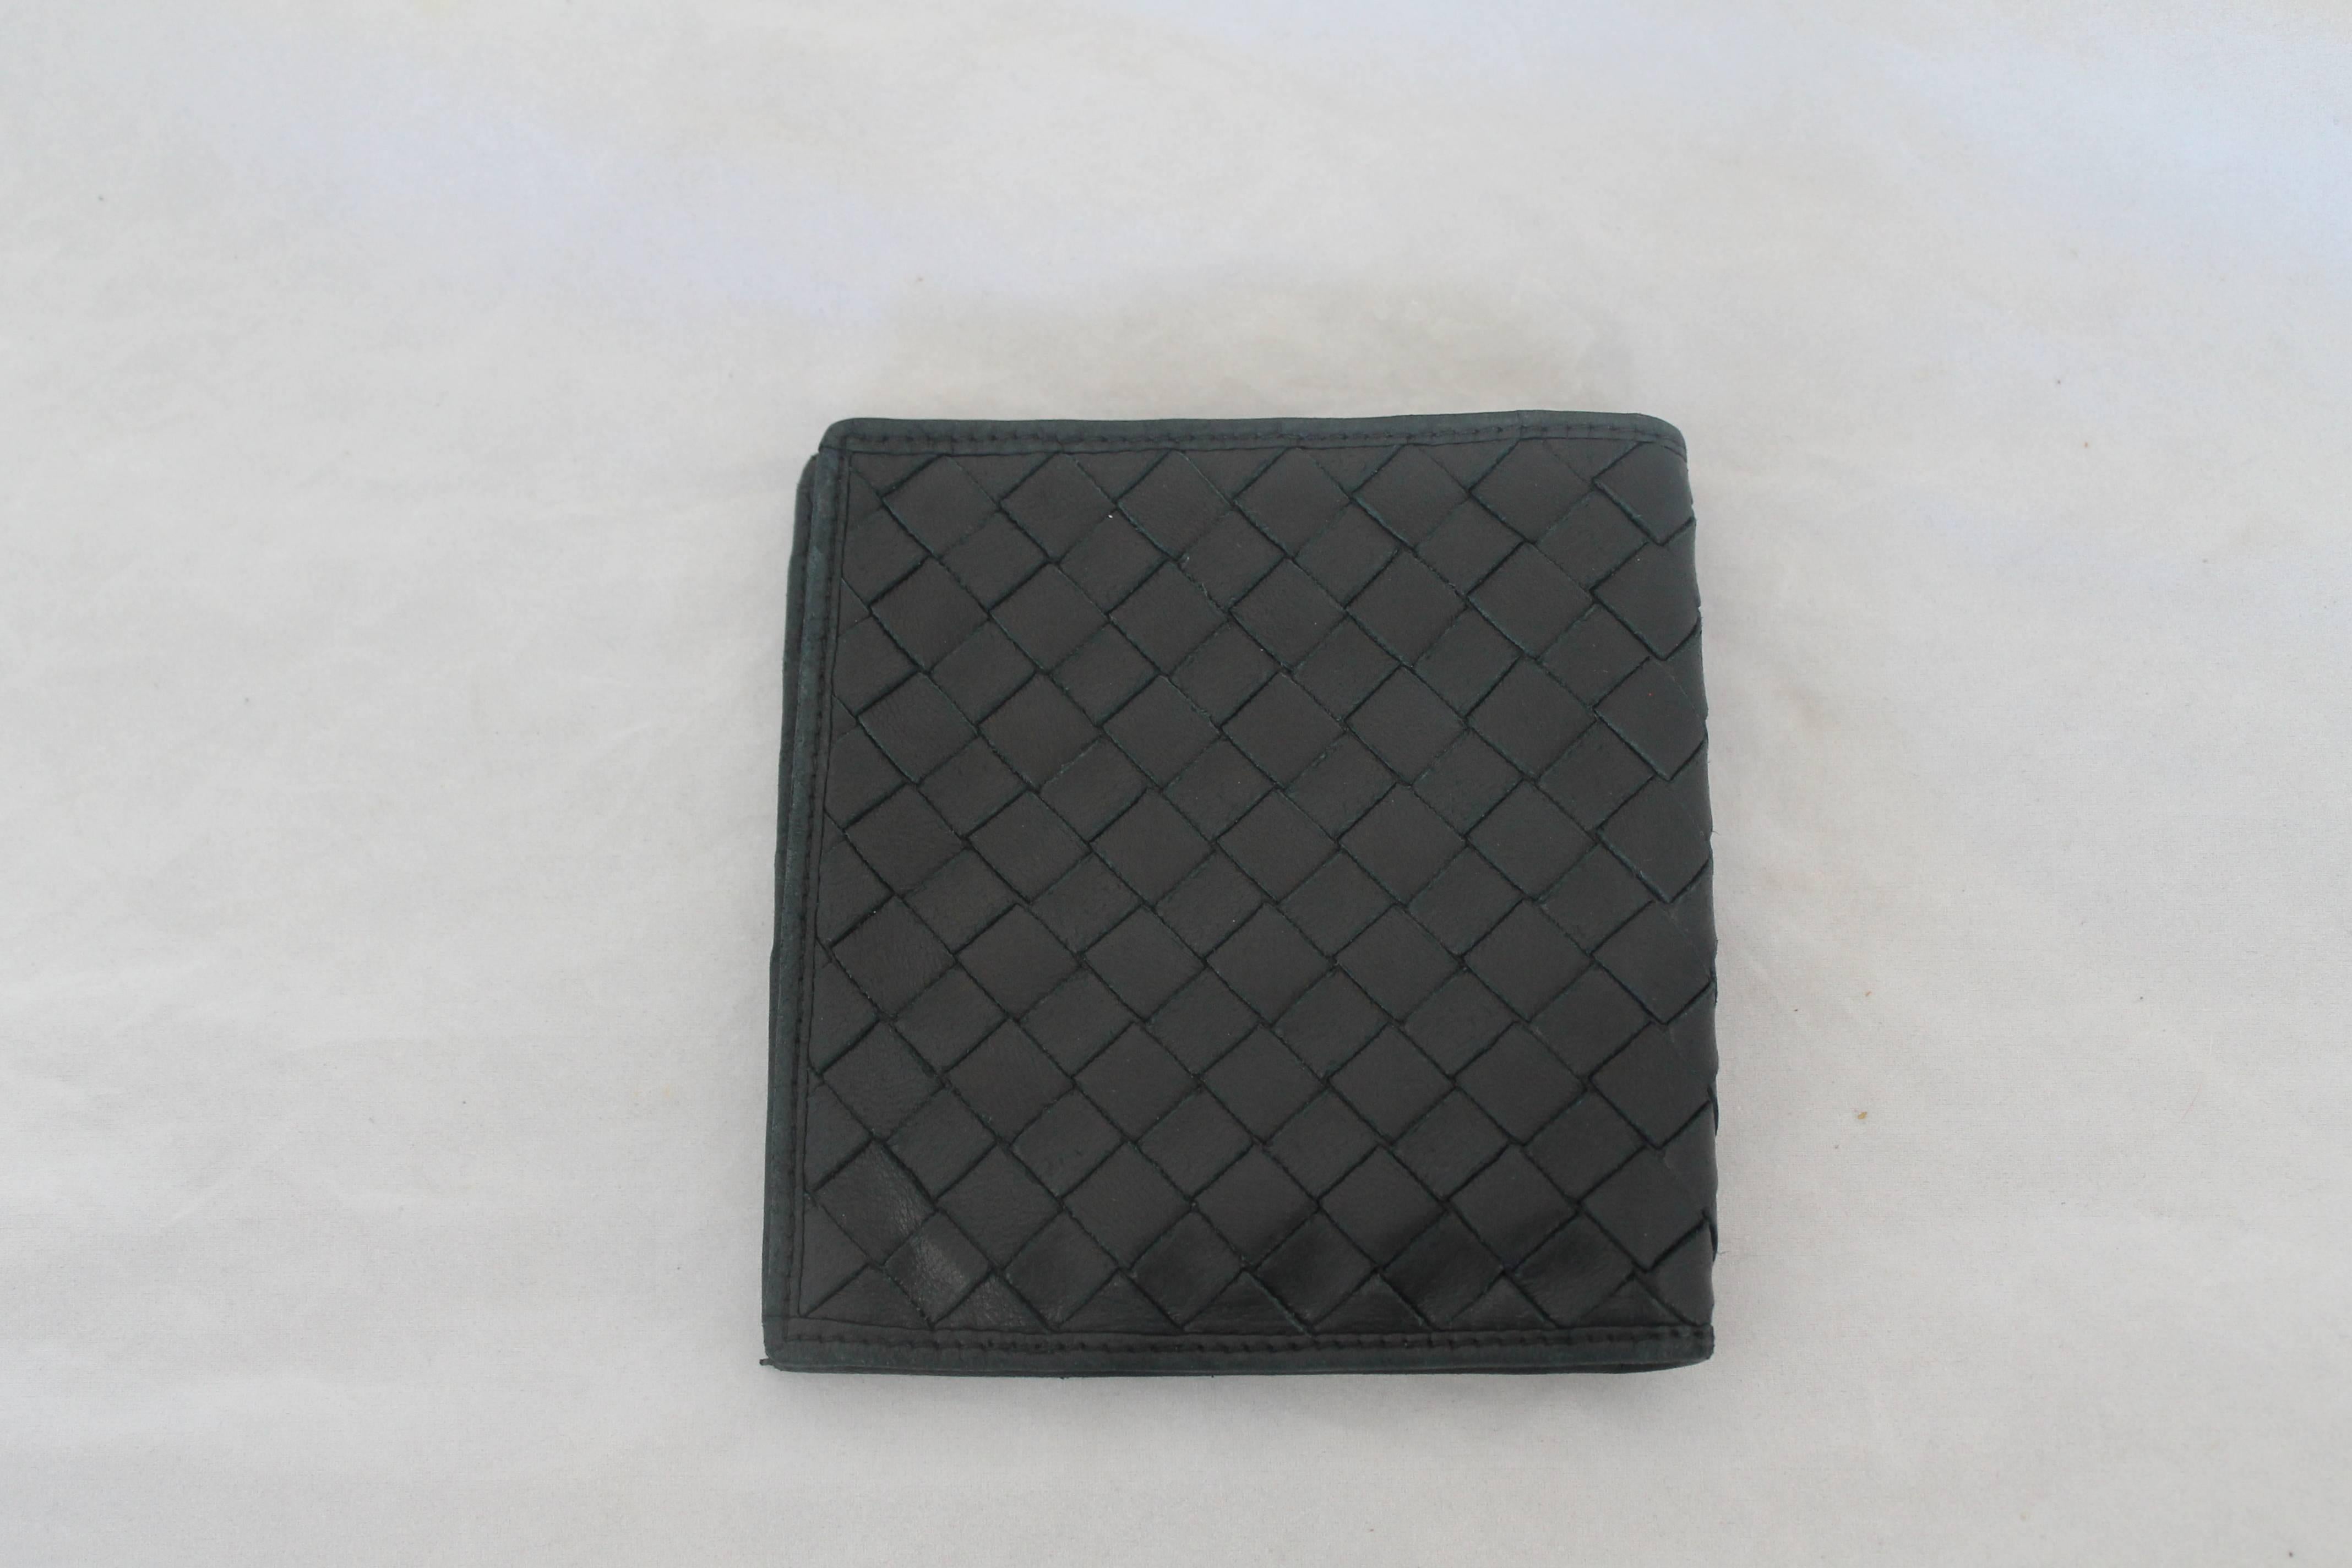 Bottega Veneta Vintage 1980's Intrecciato VN Woven Wallet. This wallet is in excellent vintage condition and is woven lambskin. There is very minor overall wear due to its age. It has 10 credit card slots & 1 large slot for